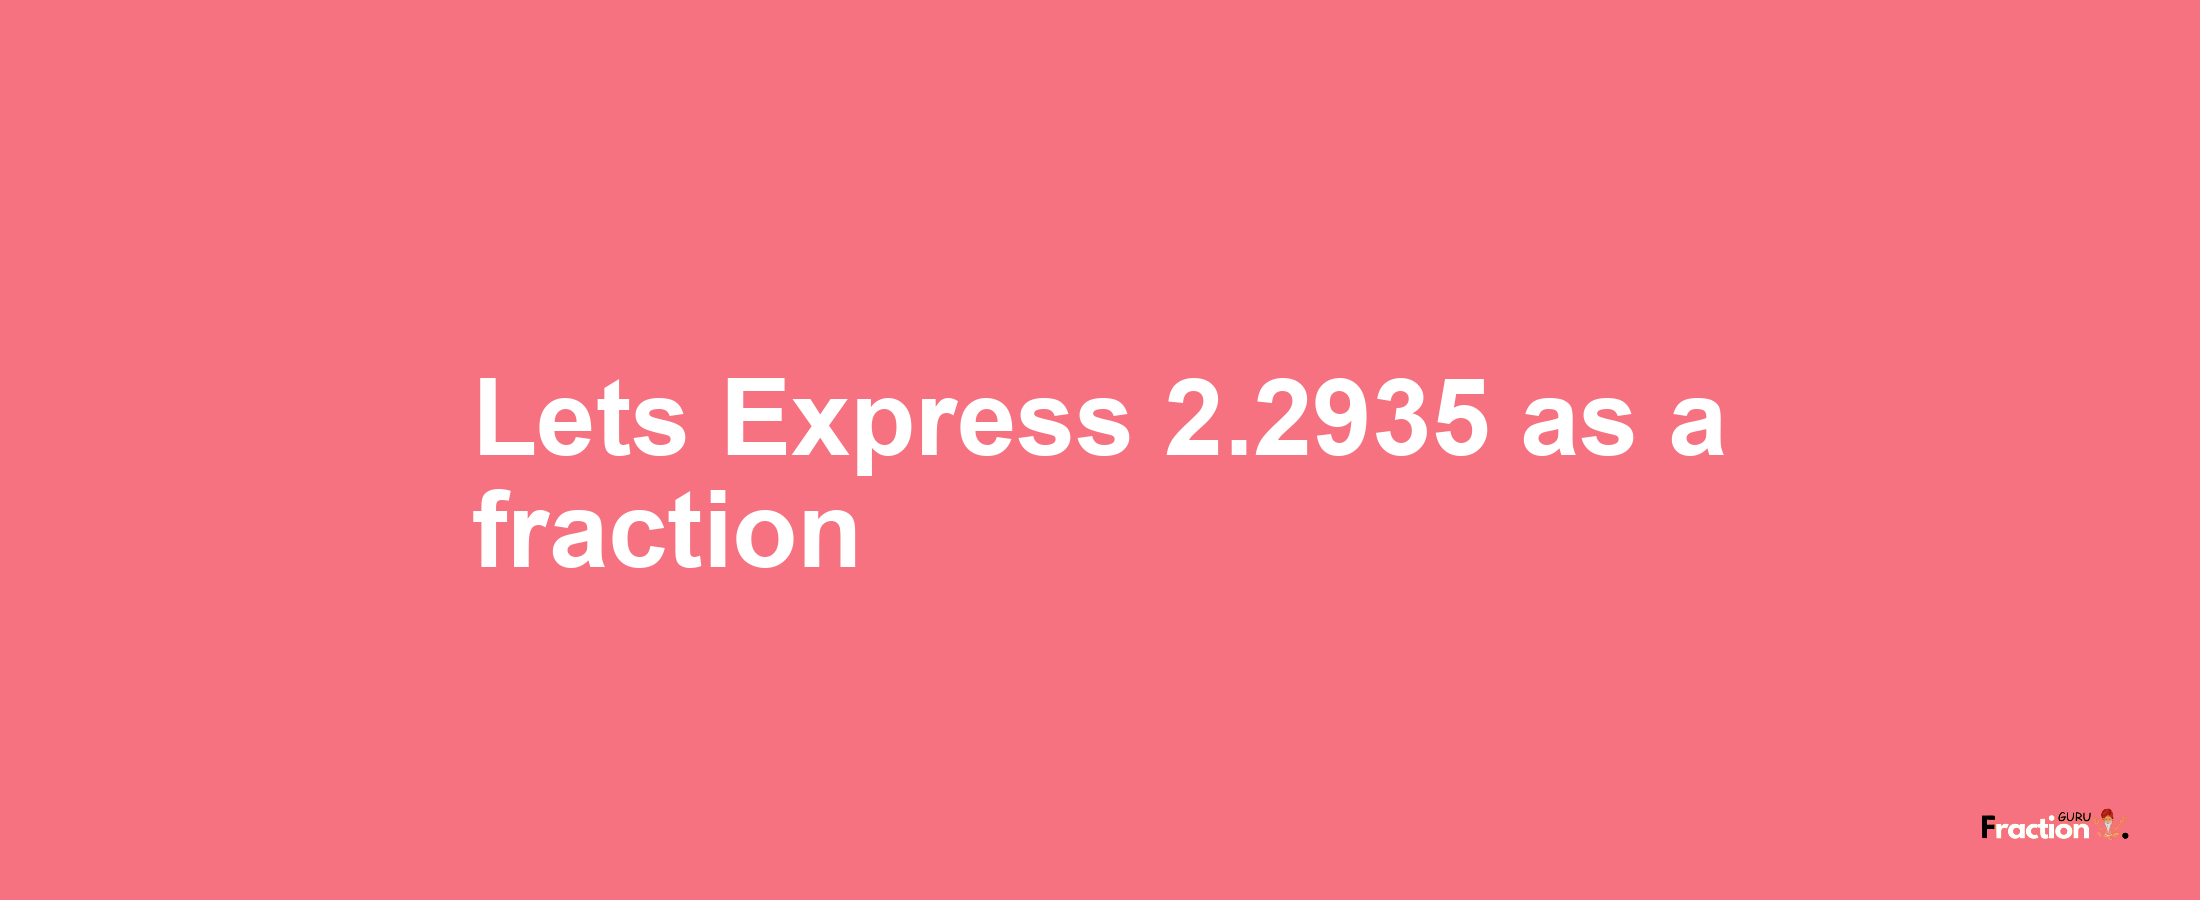 Lets Express 2.2935 as afraction